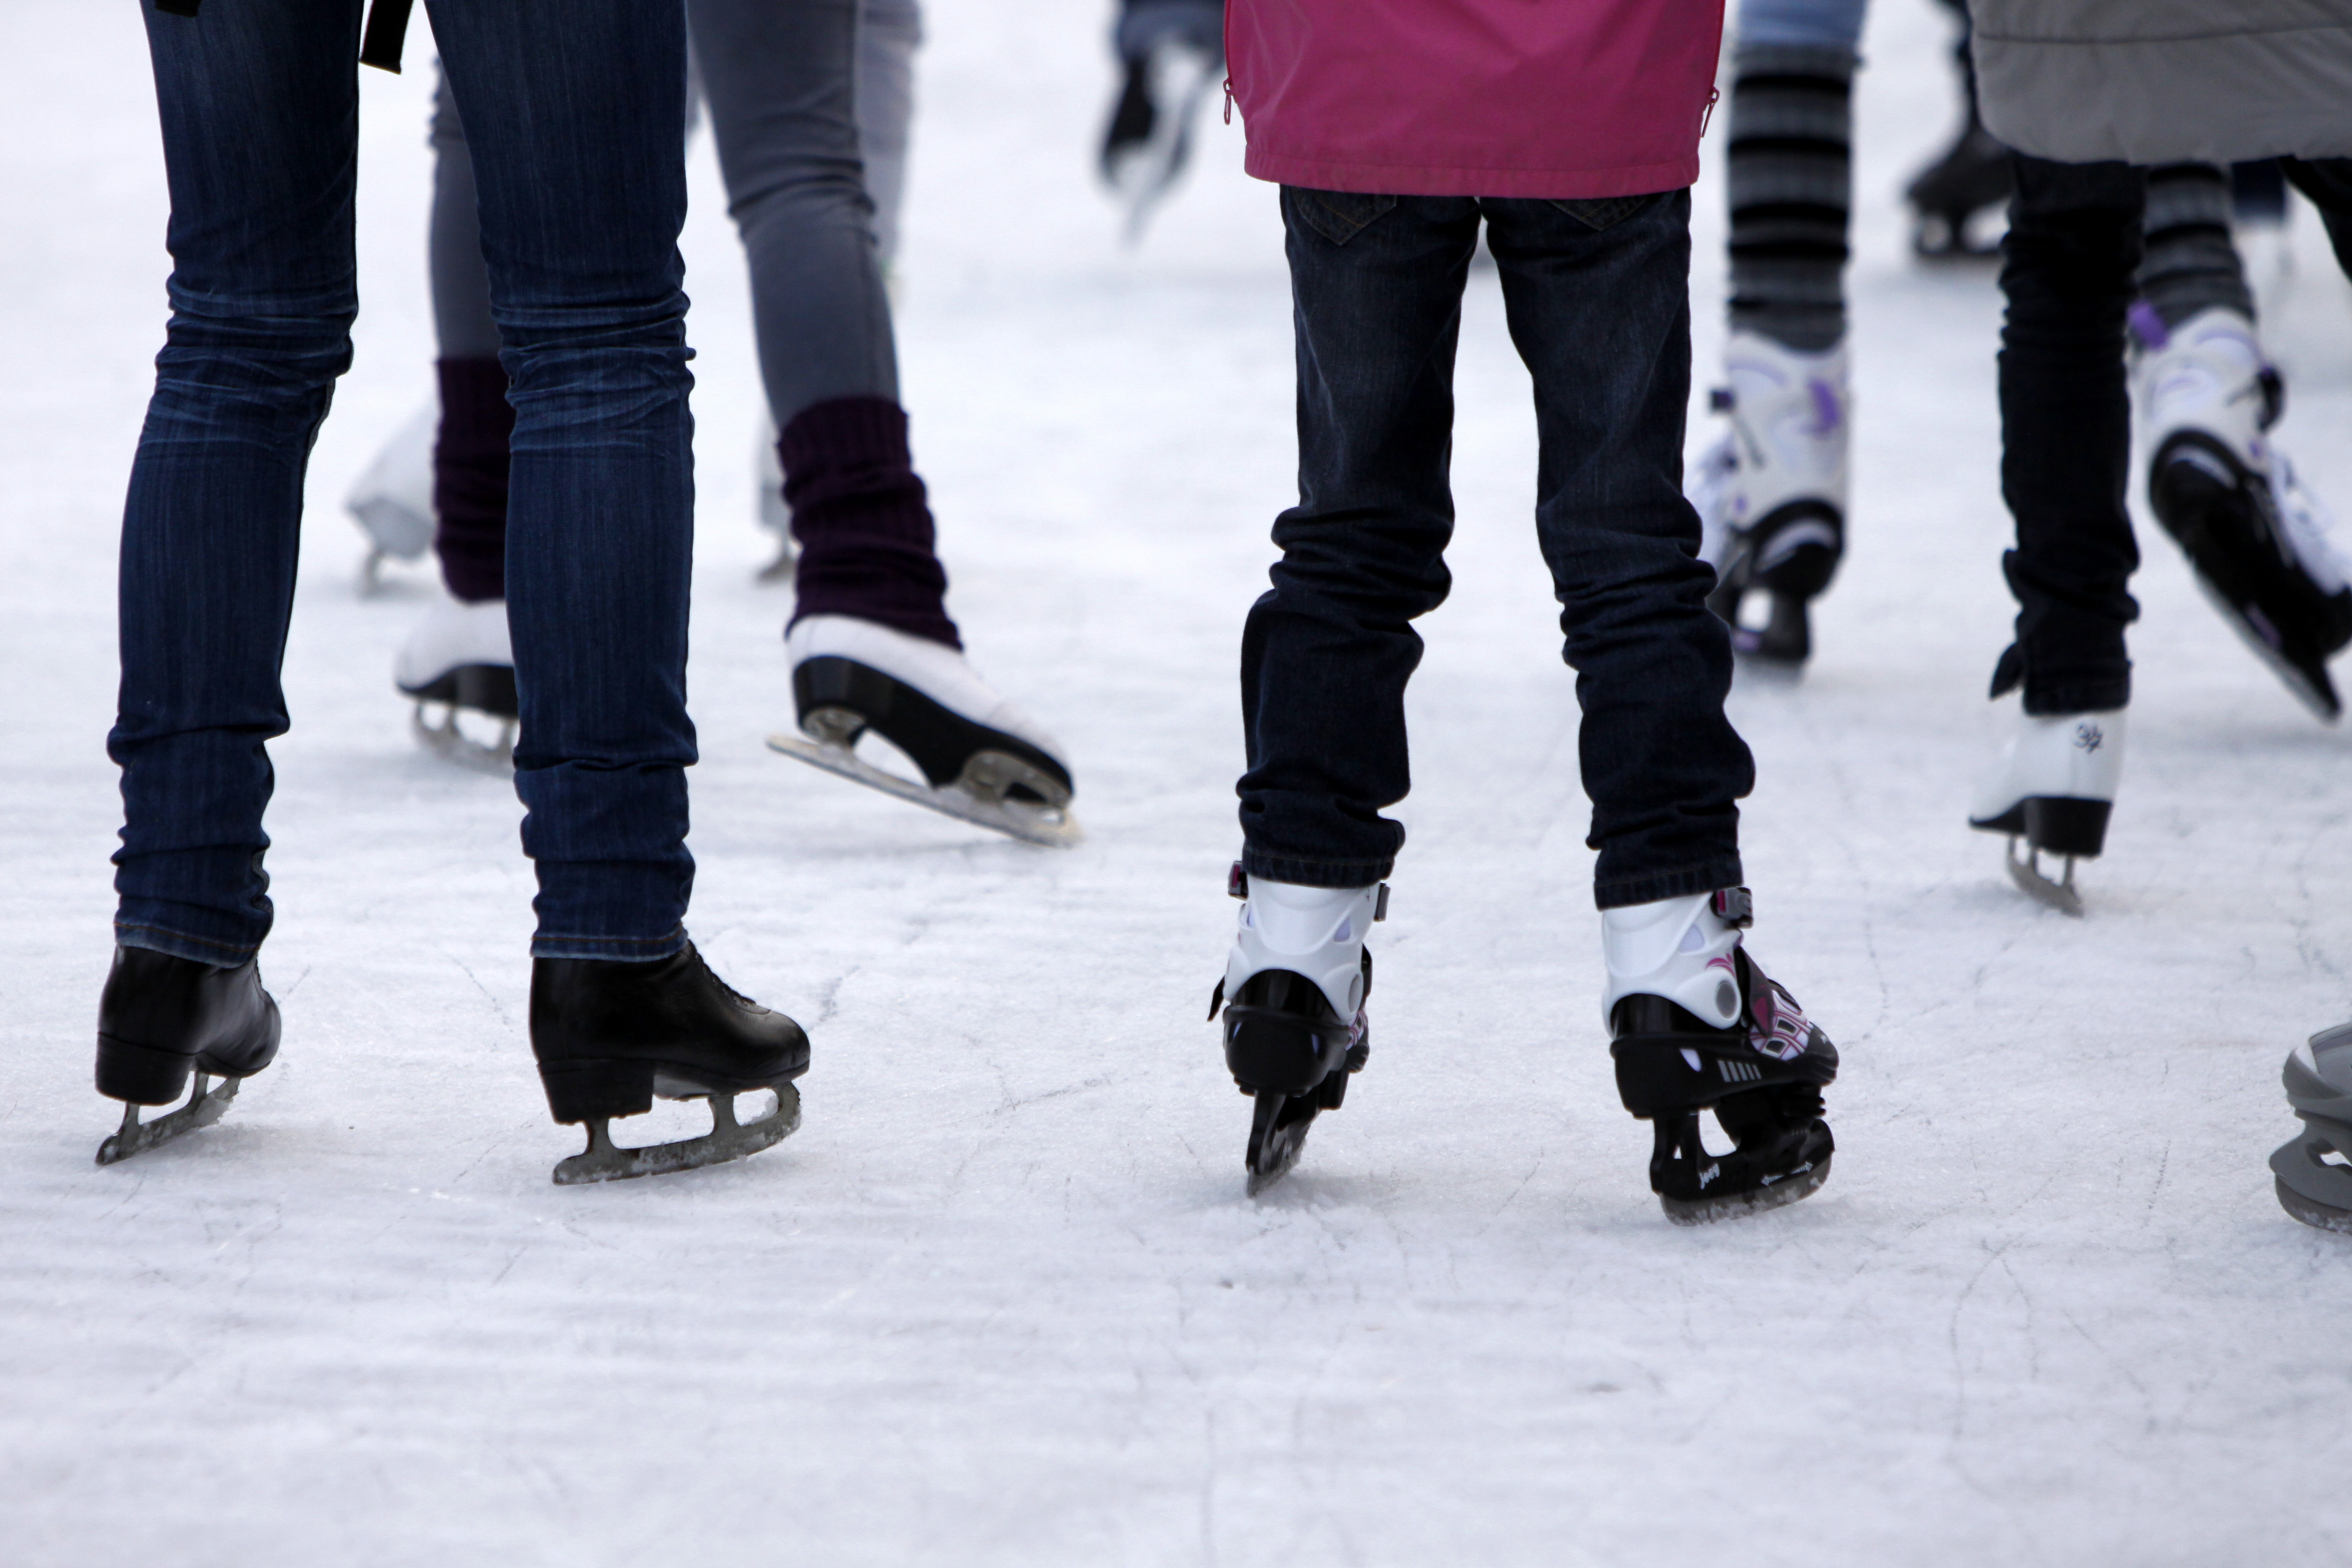 Wilderness at the Smokies to Open Outdoor Ice Skating Rink